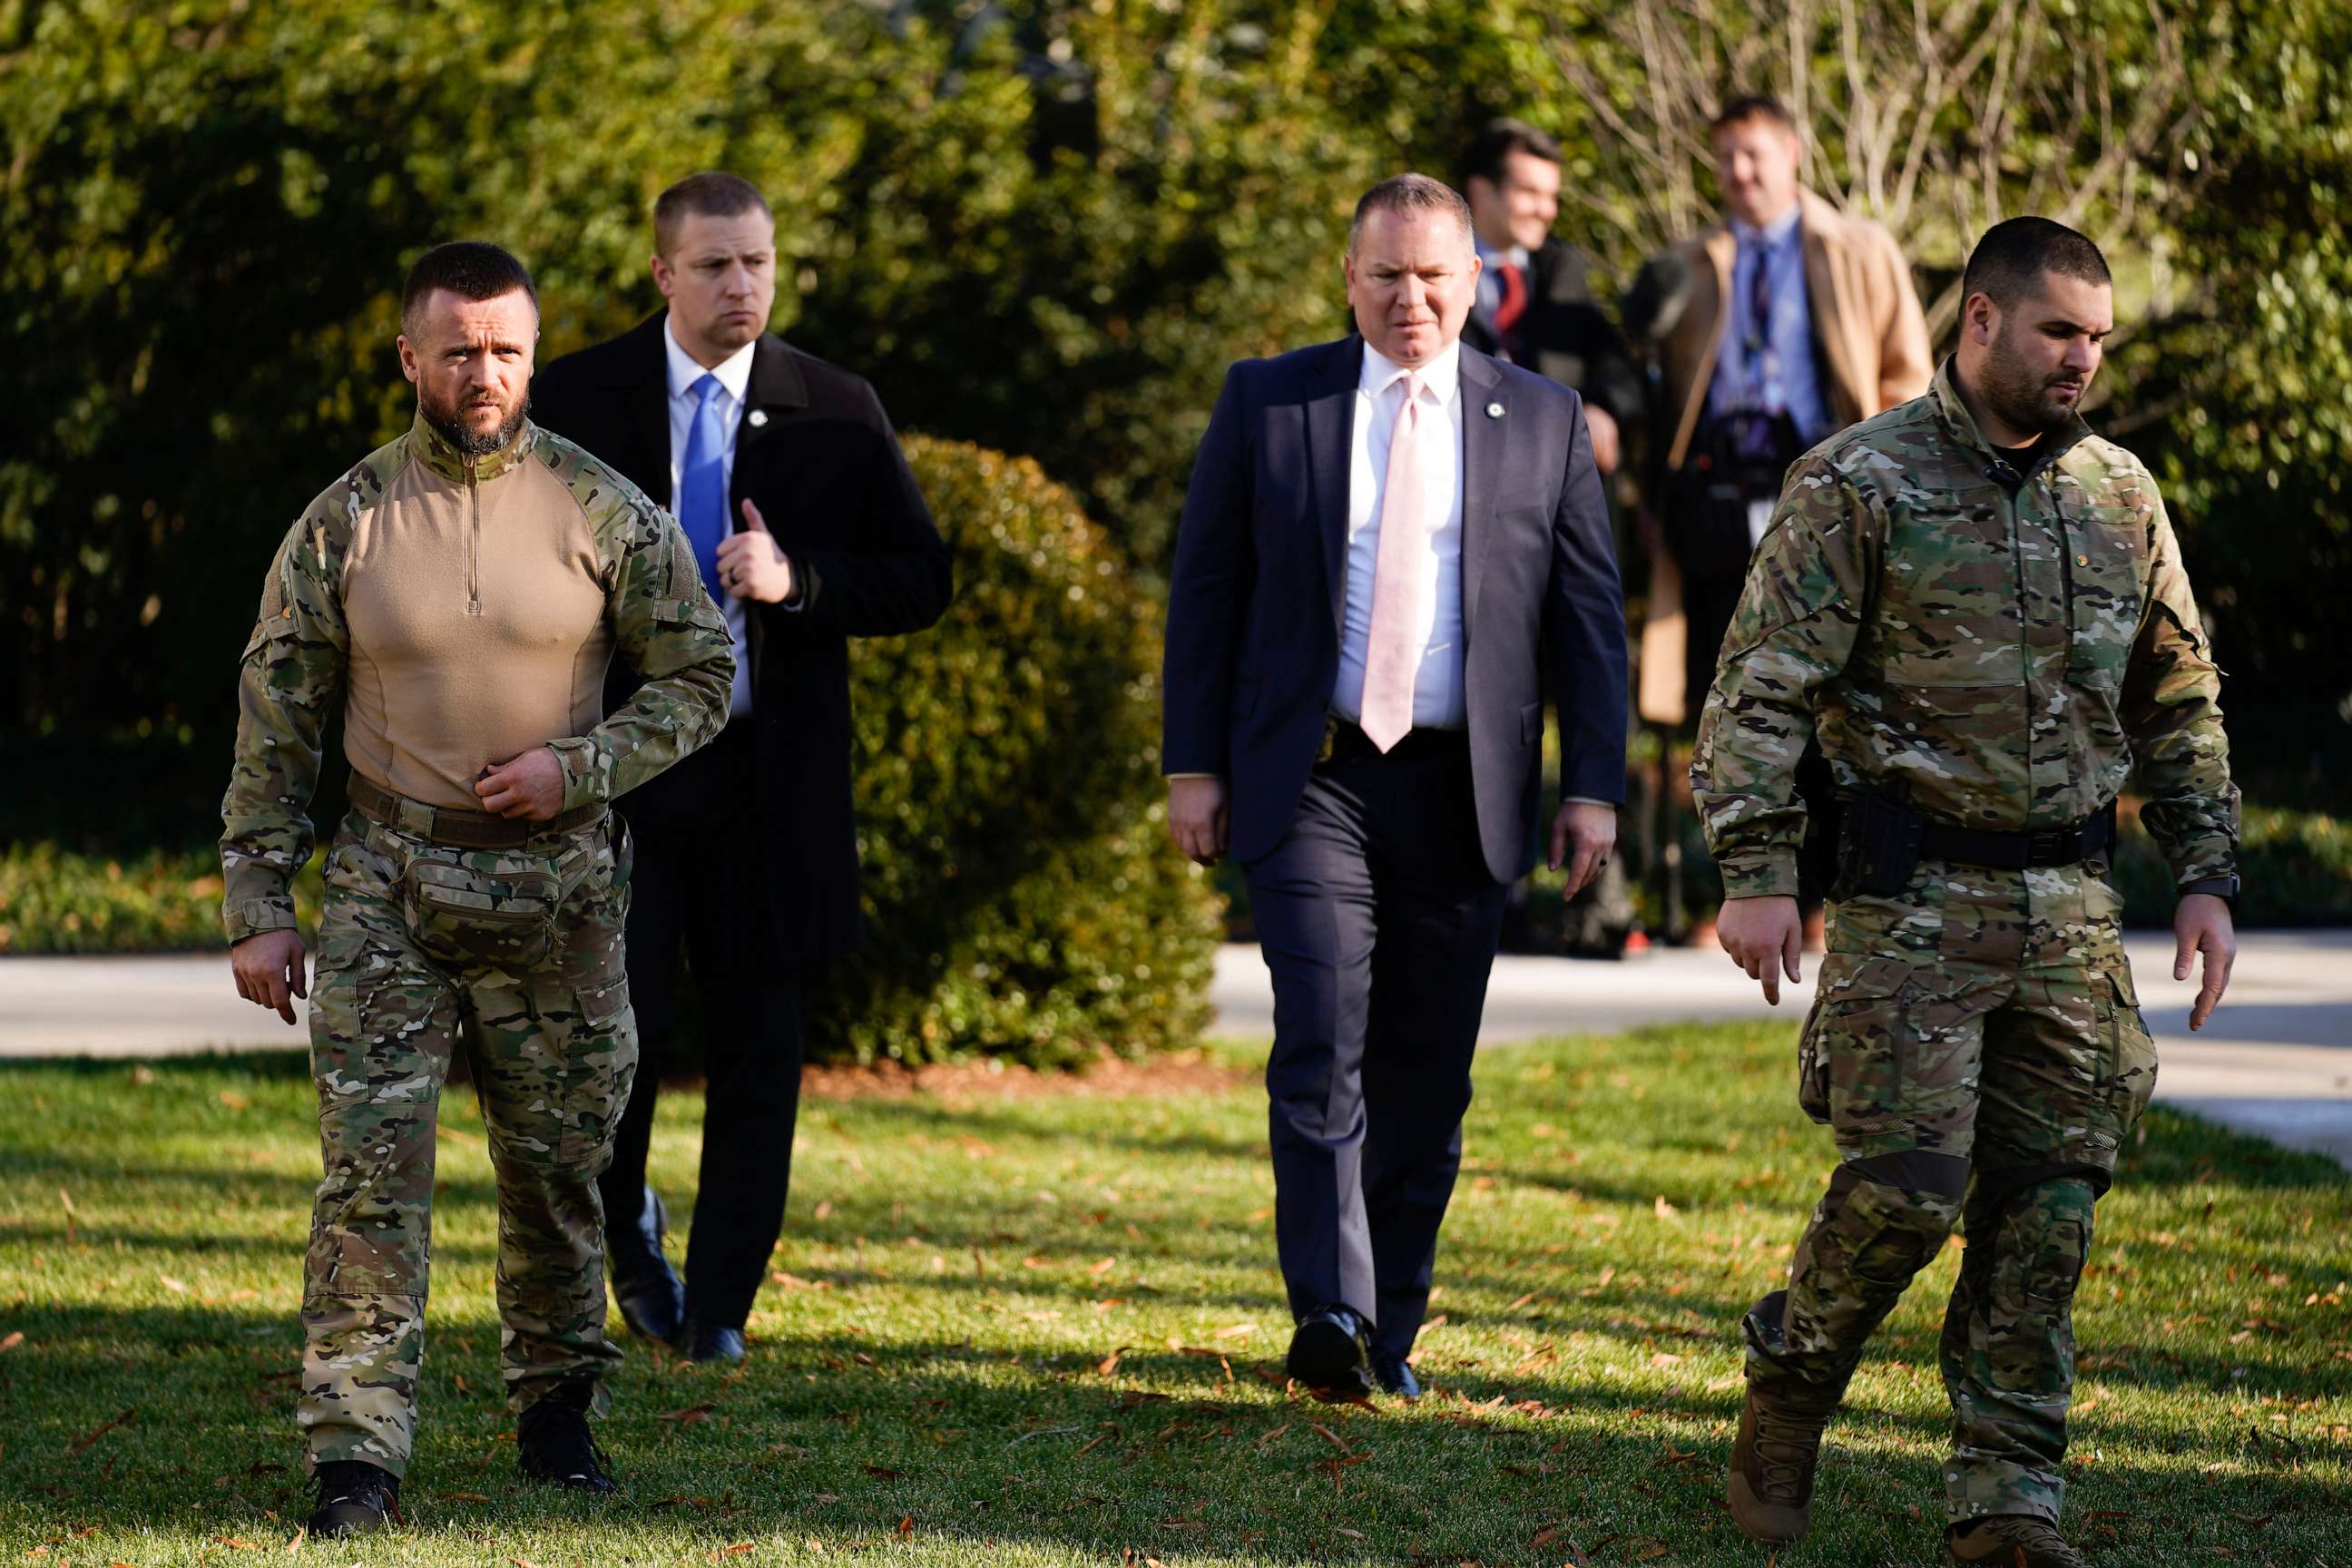 PHOTO: Members of the security forces for Ukraine's President Volodymyr Zelenskyy are followed by members of the Secret Service during Zelenskyy's visit to the White House in Washington, Dec. 21, 2022.